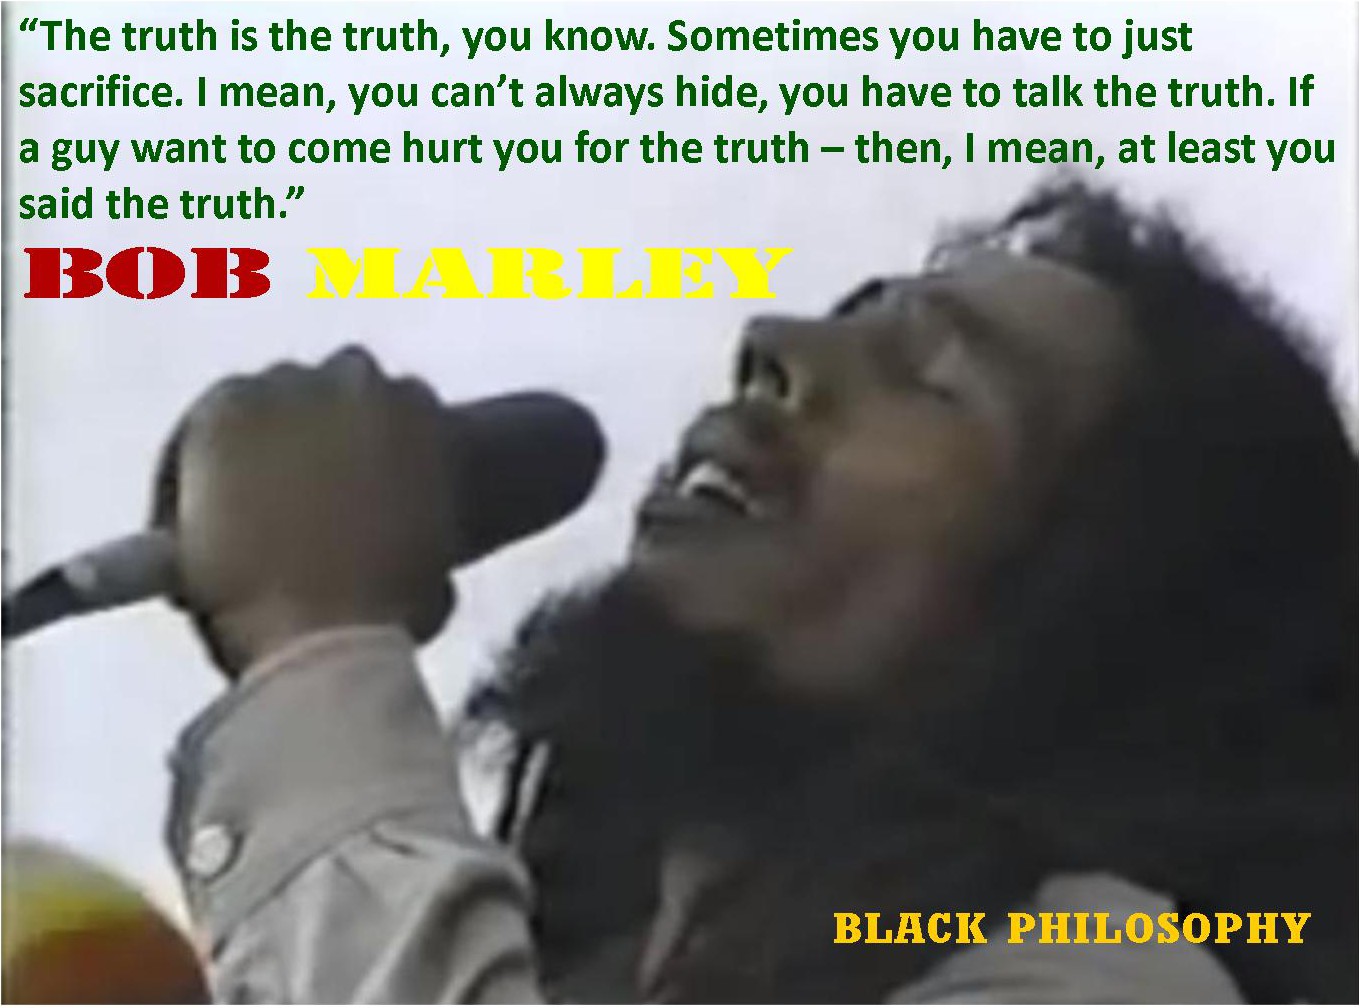  Bob Marley A Prophet of His Times and a Revolutionary